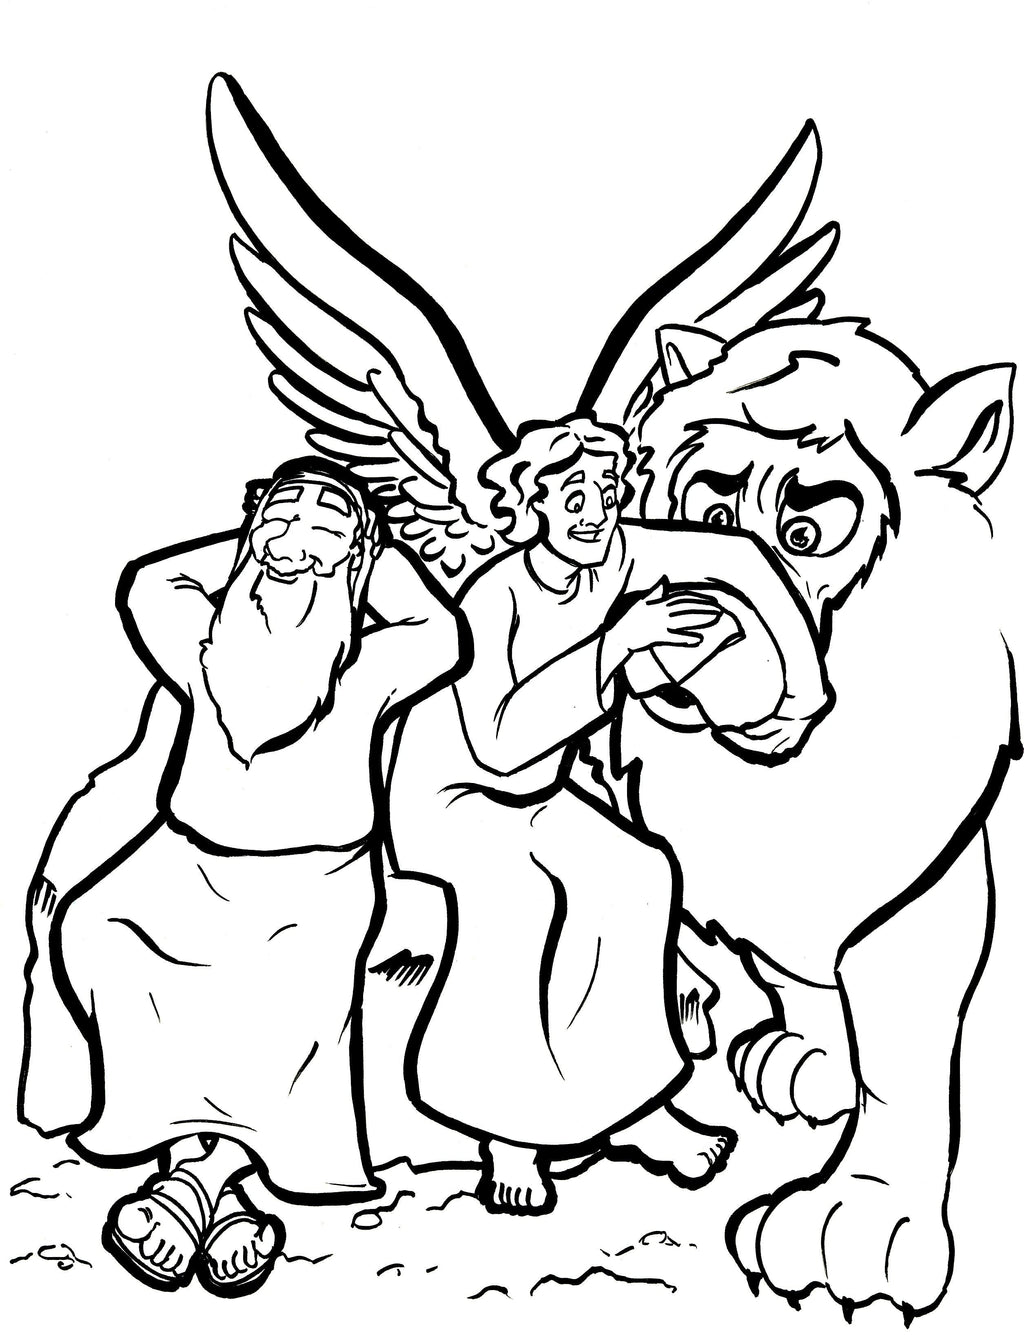 Daniel in the lions den coloring page